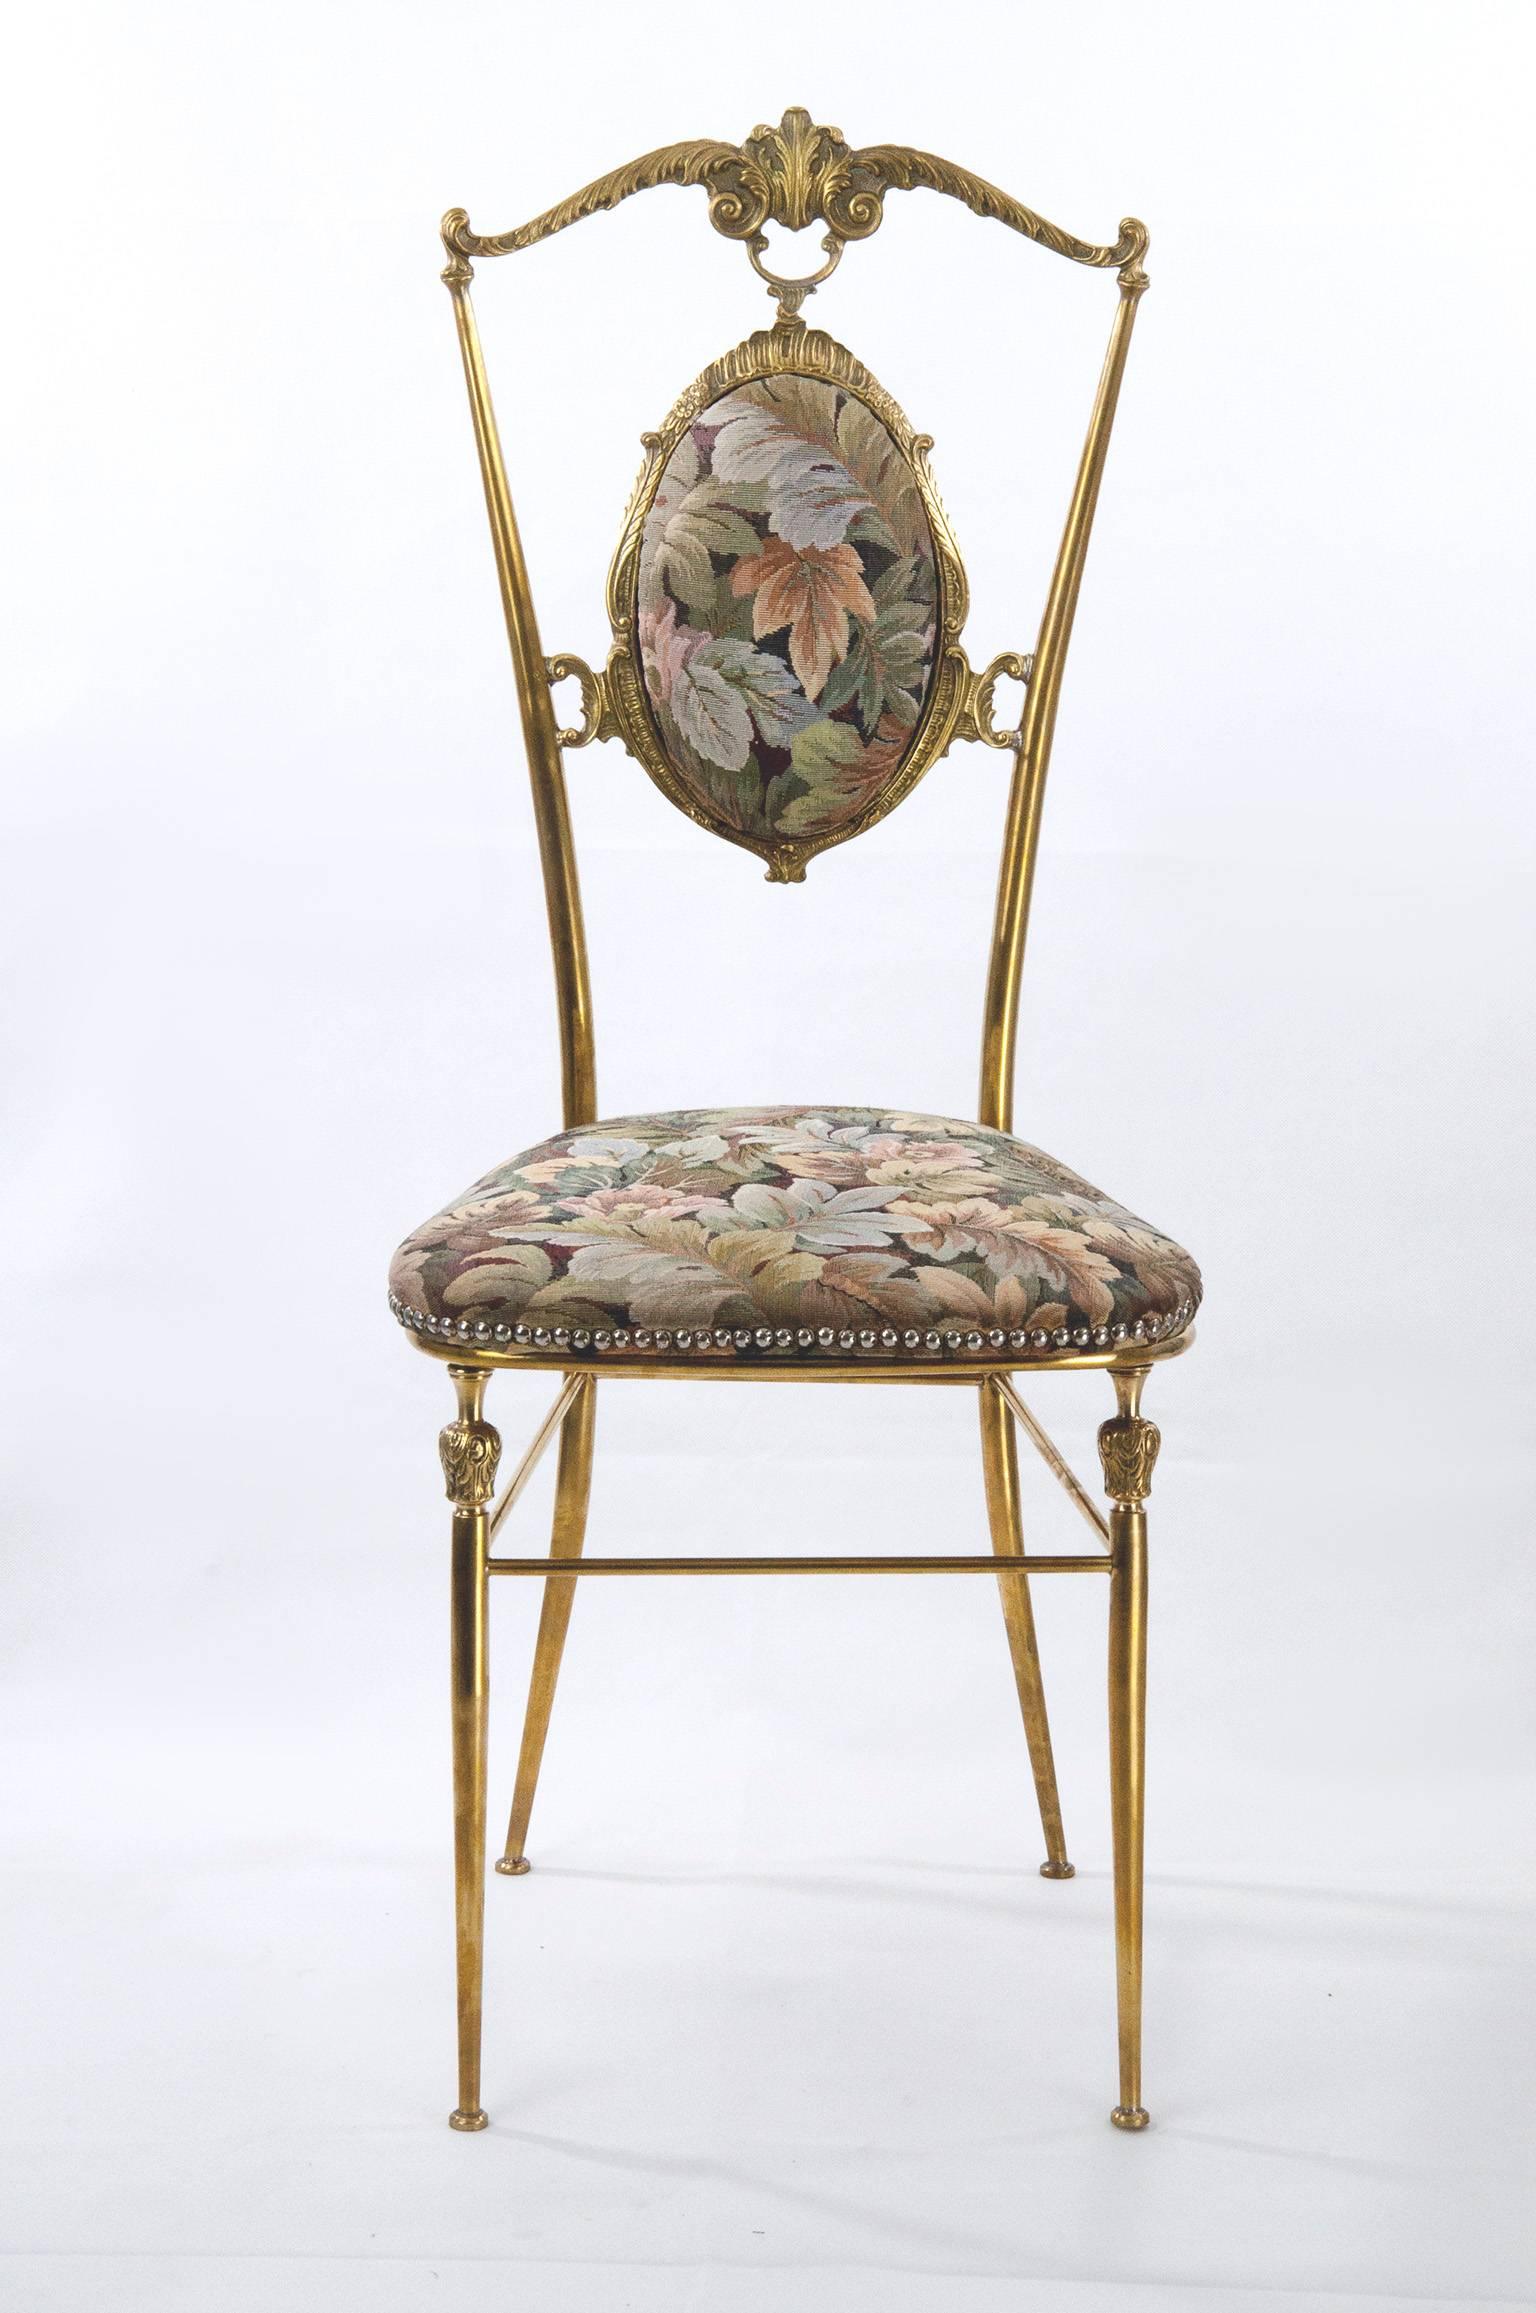 Exceptional Italian 1950 vintage pair of chairs in the Style of Chiavari
Louis XVI style.